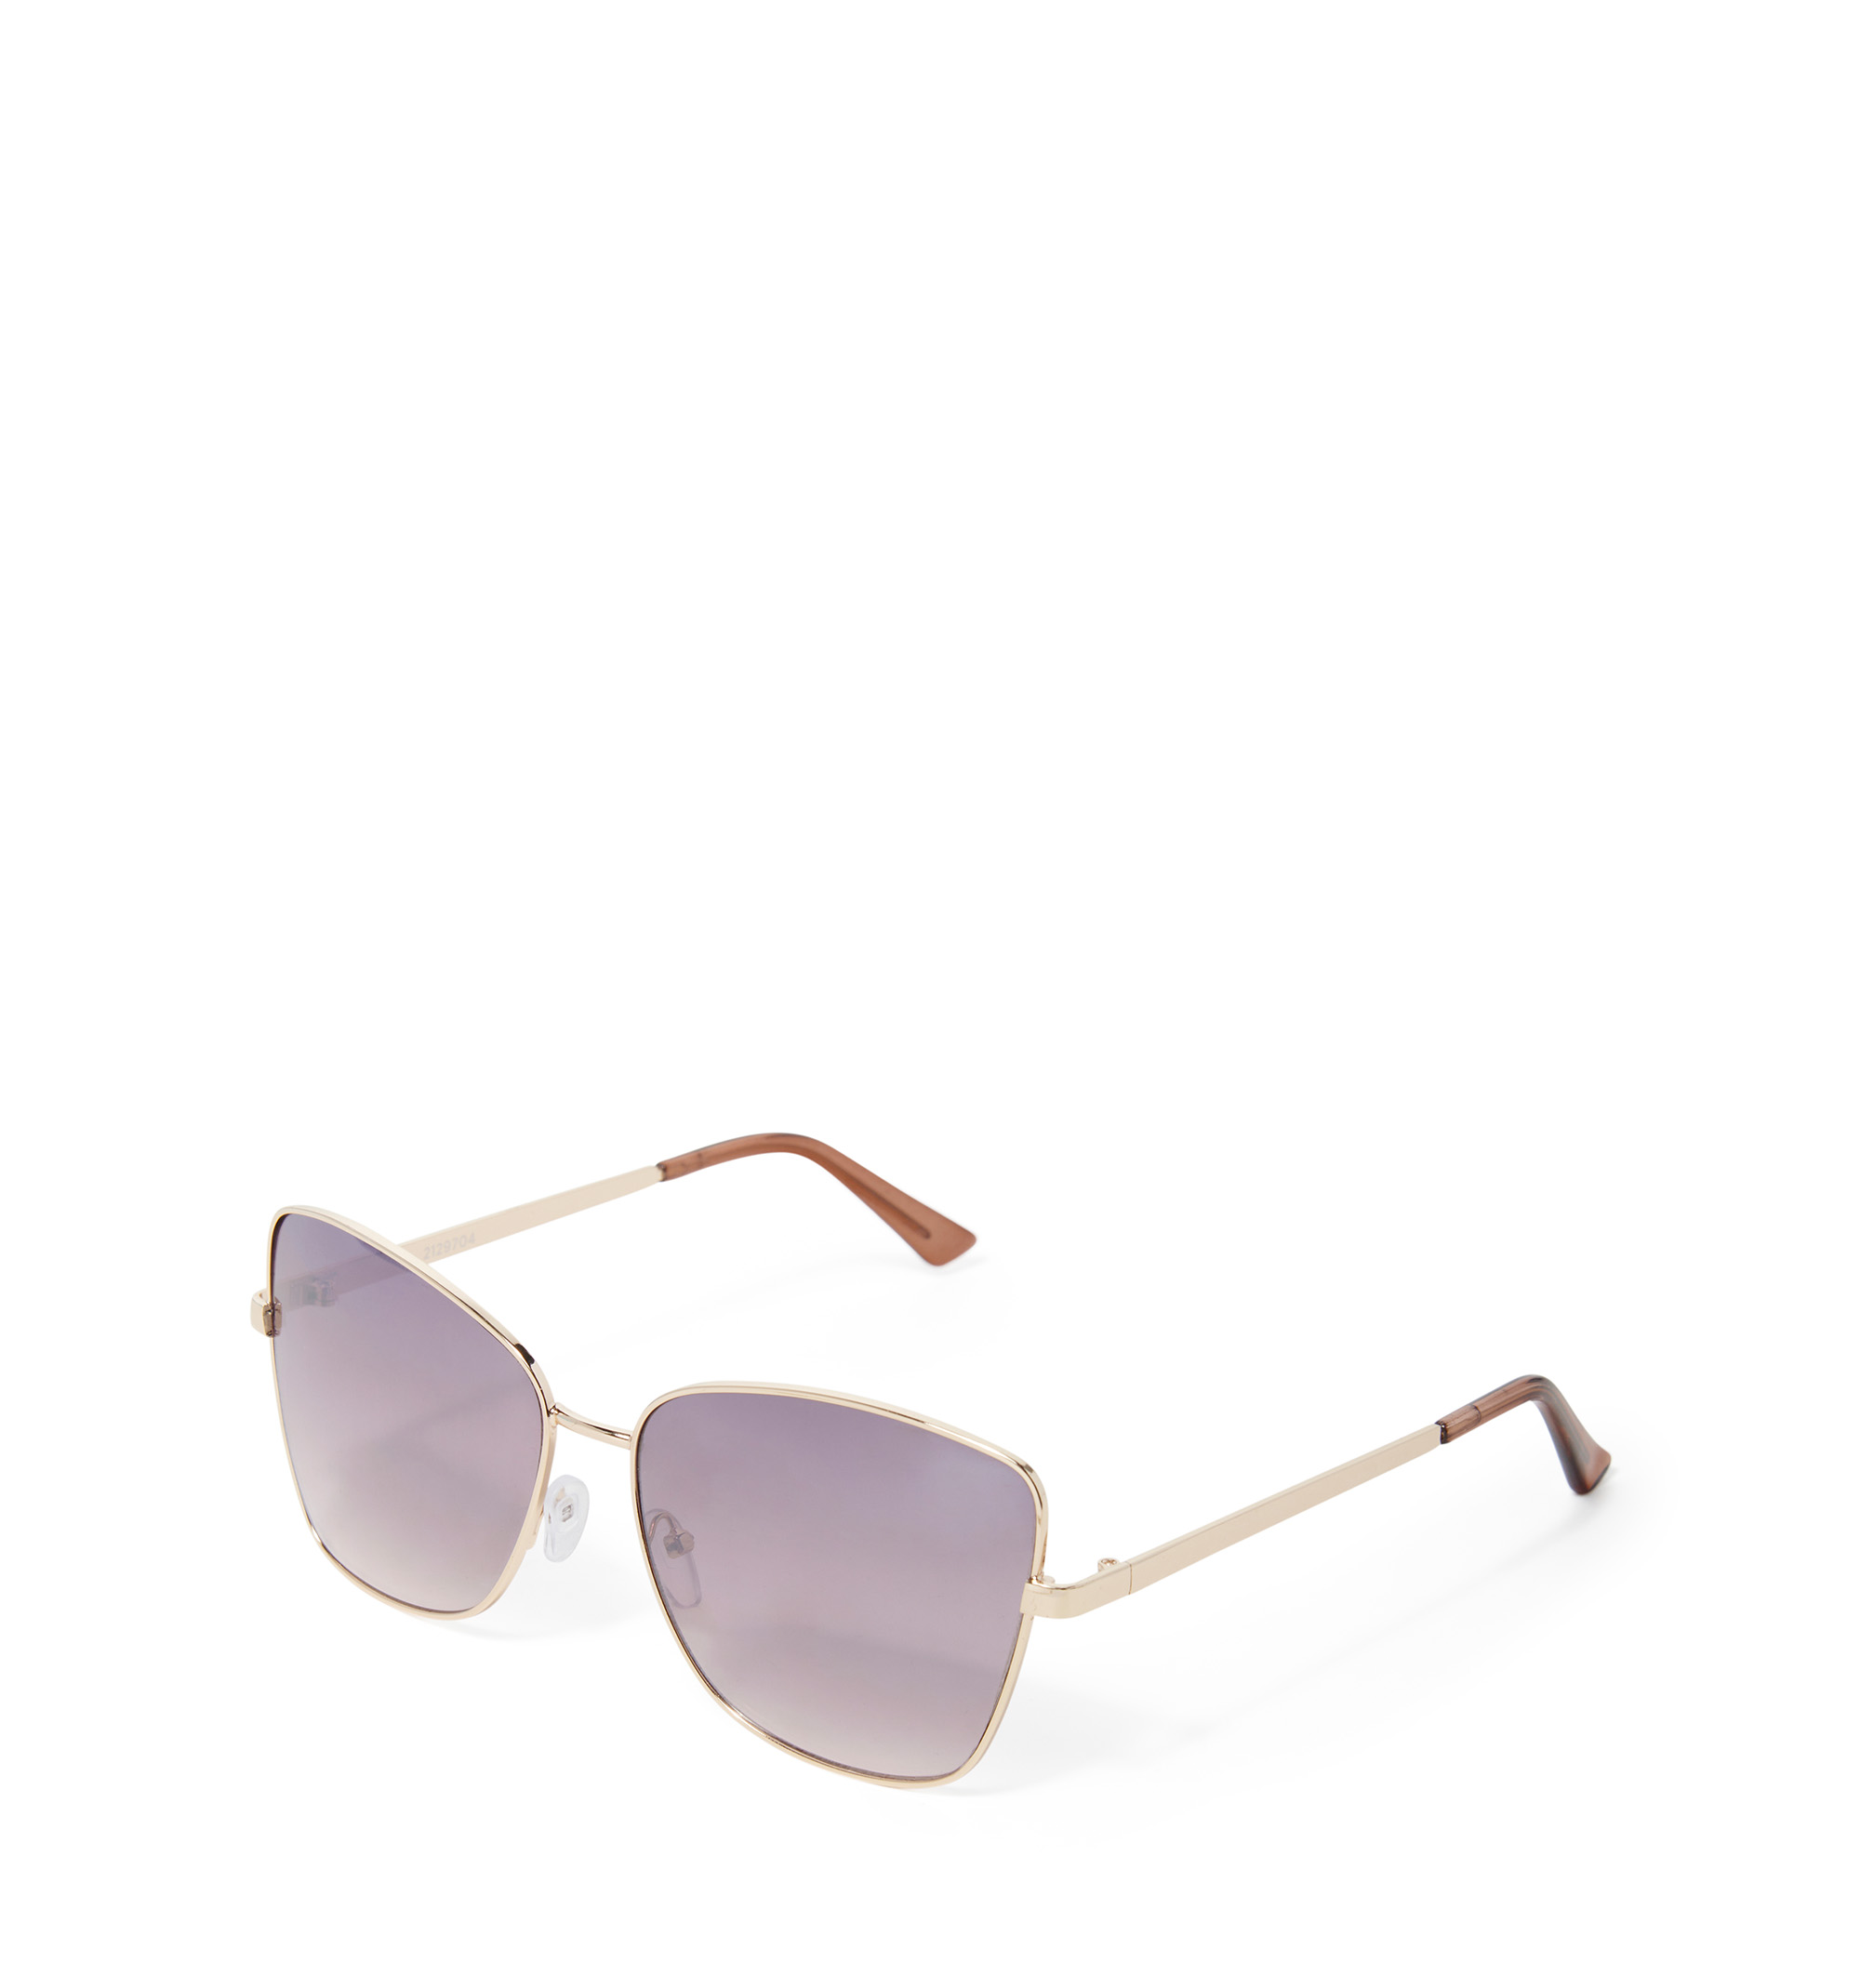 Discover 140+ oversized sunglasses best